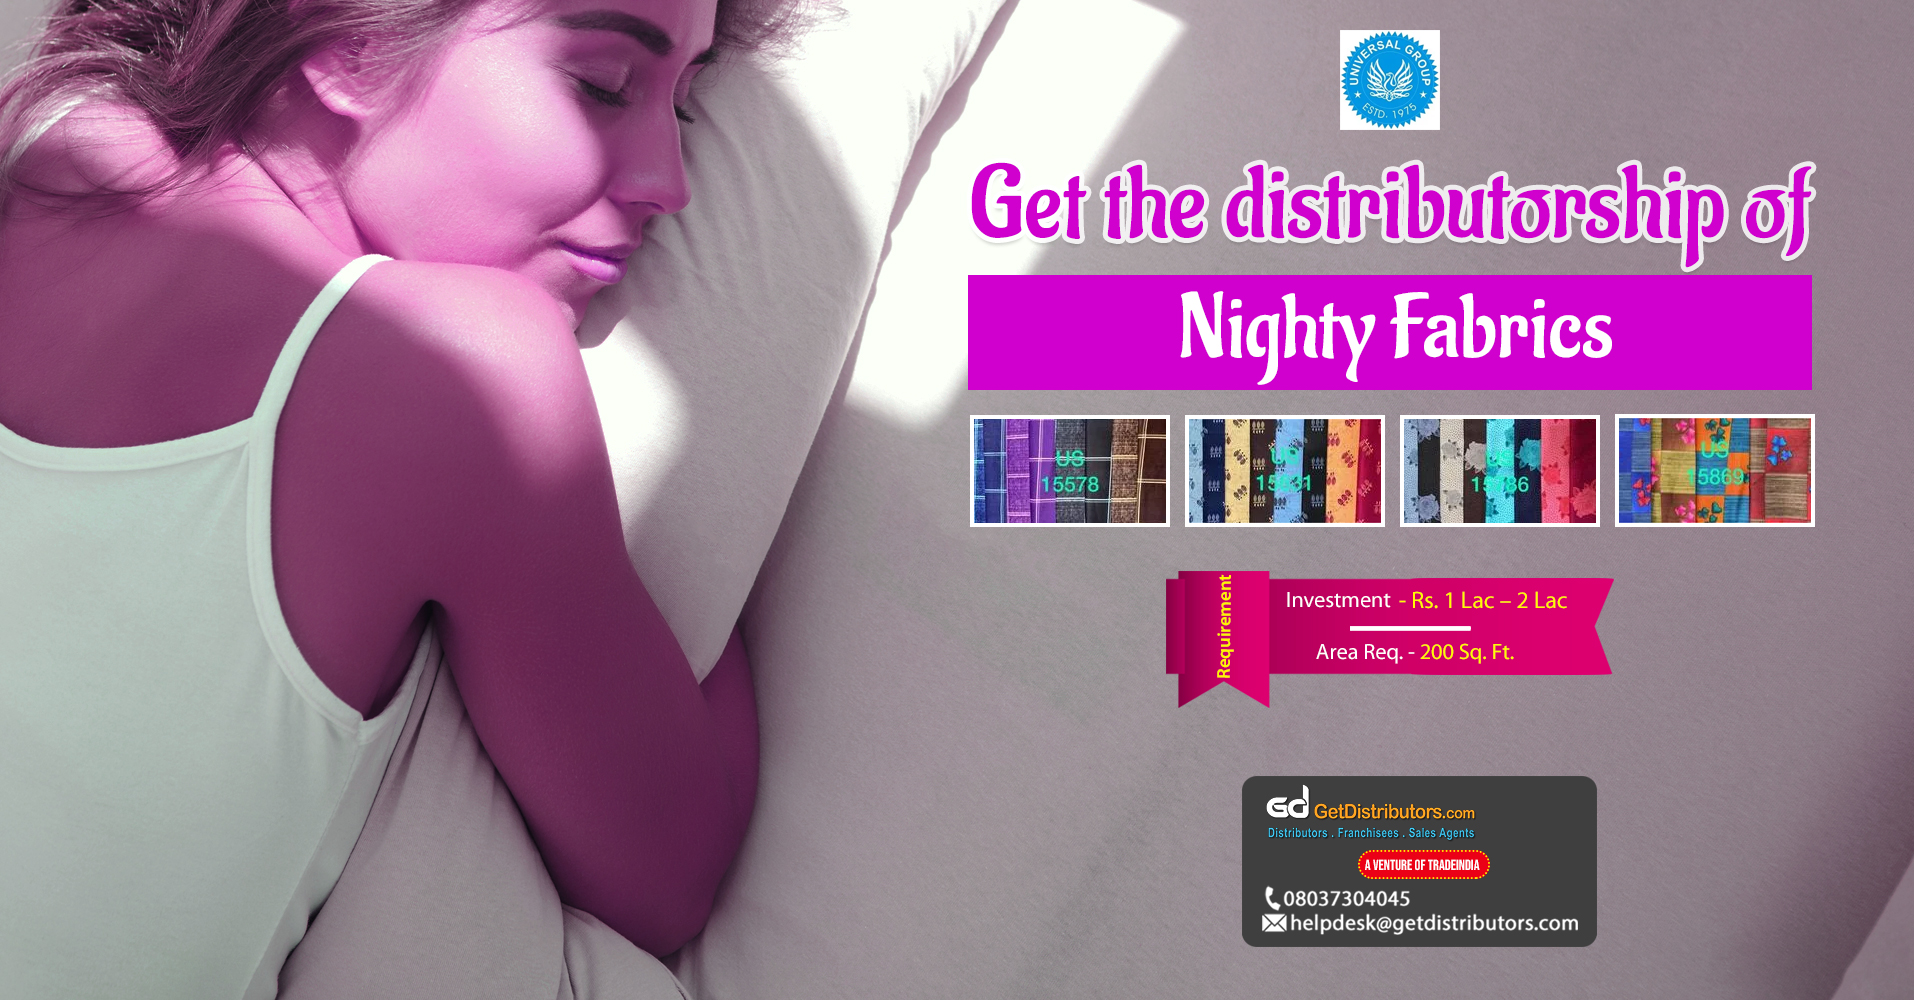 A variety of nighty fabrics for distribution